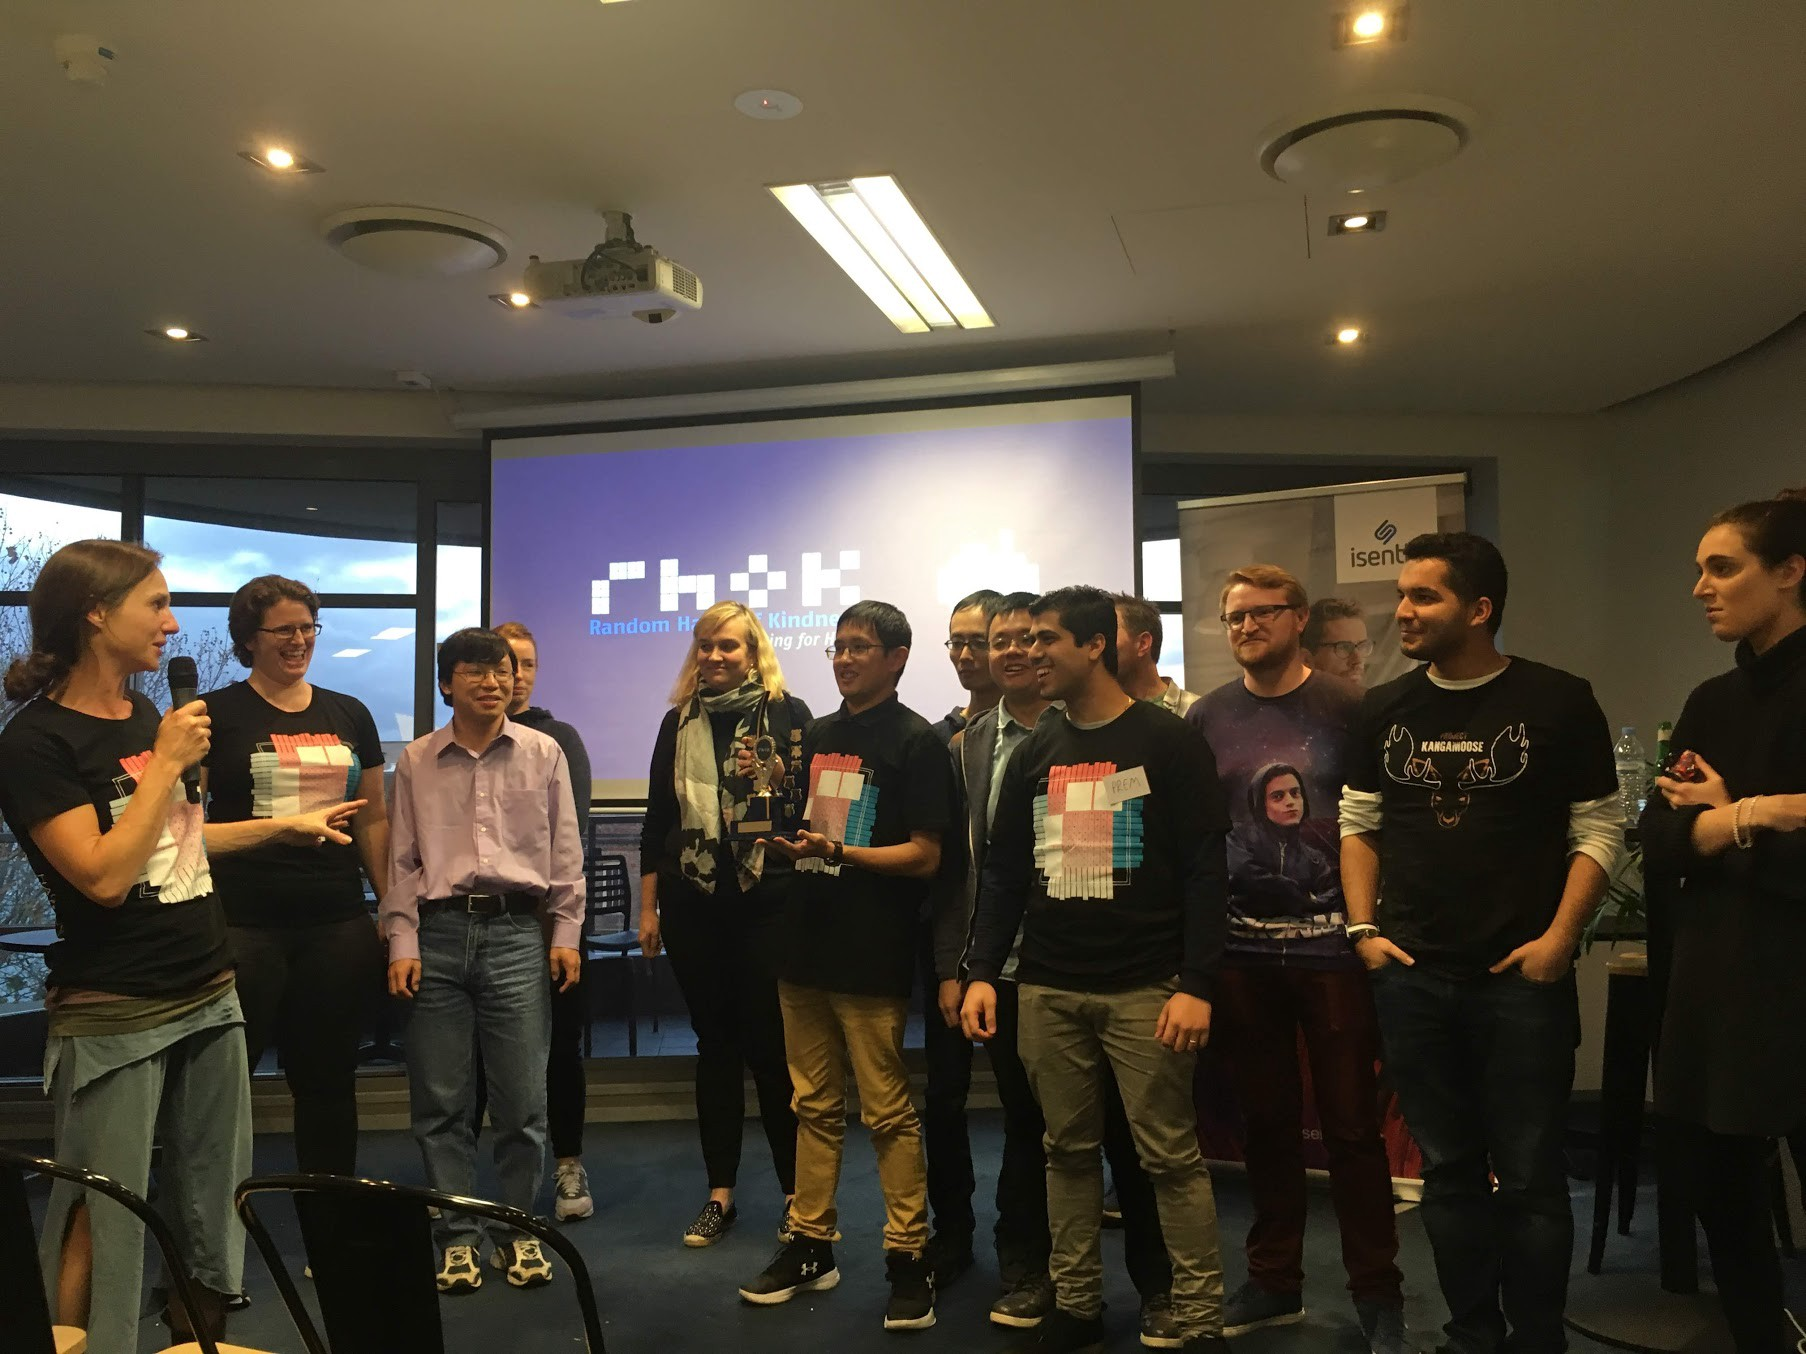 A picture of a winning Random Hacks of Kindness team